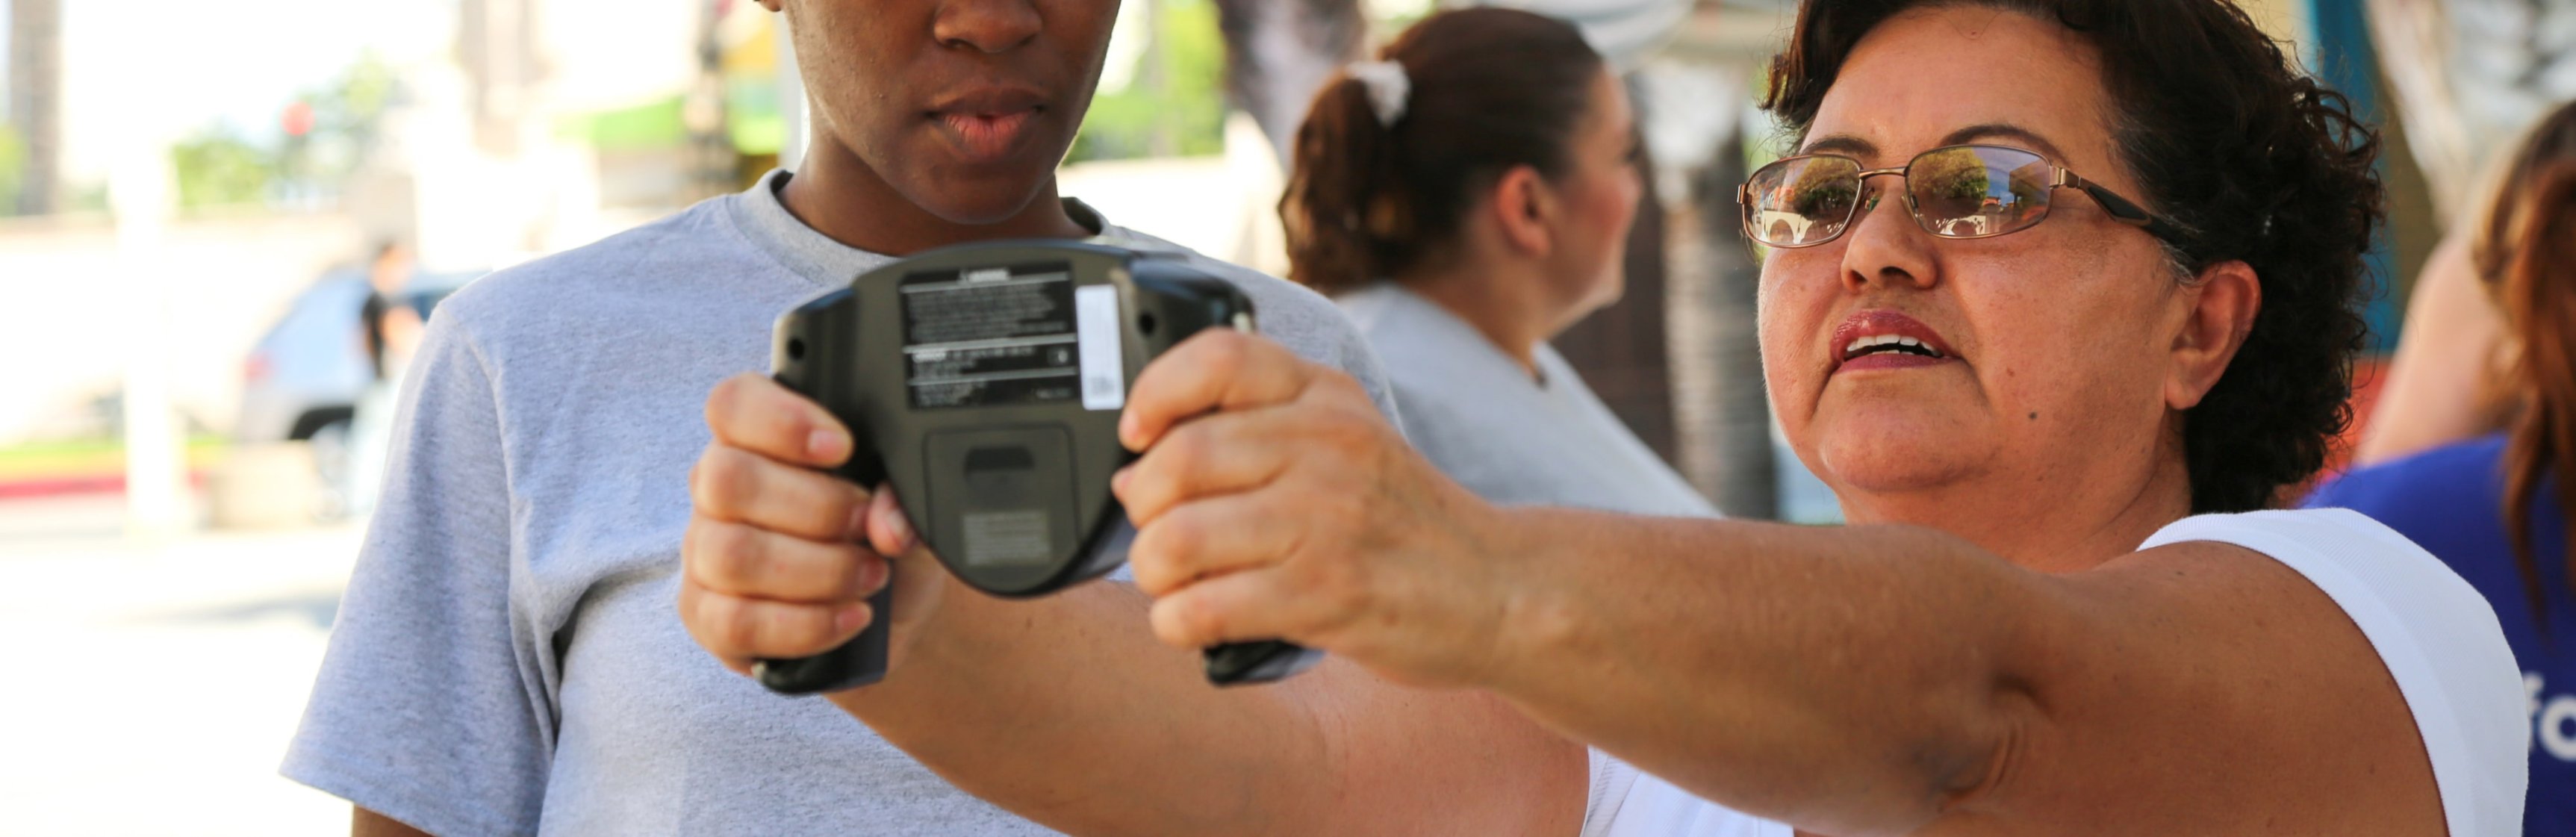 Female Latina patient holds up medical device at outdoor health screening event